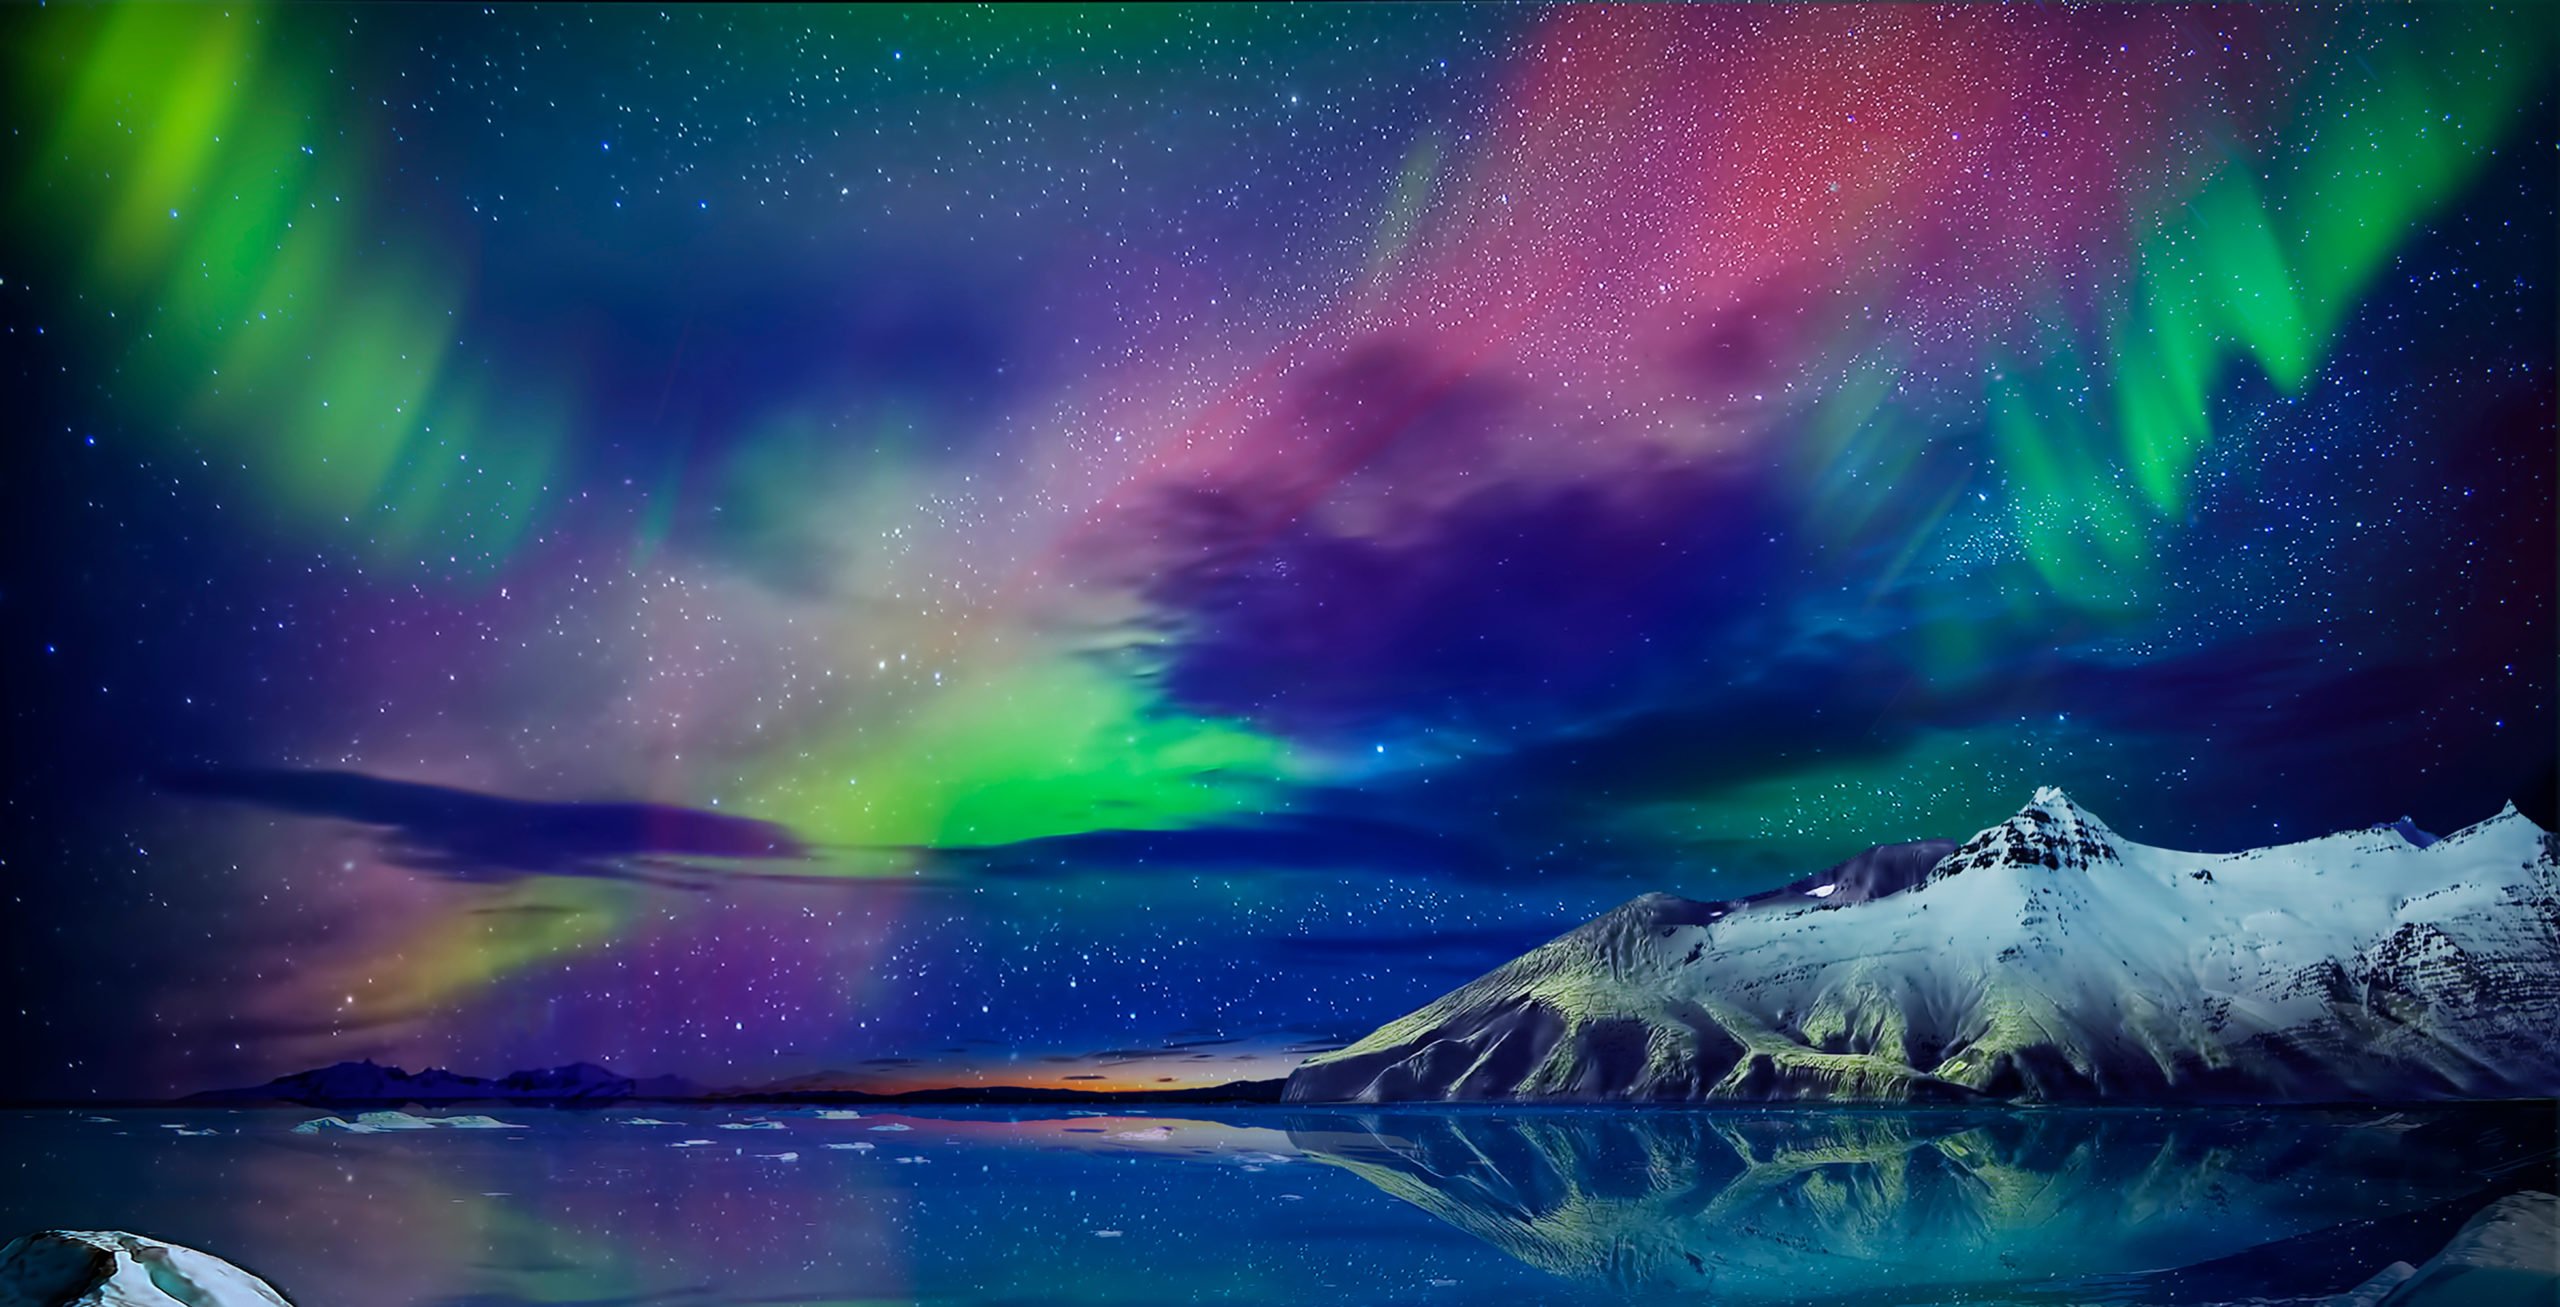 Watch The Unbelievable Iceland Northern Light In Our Blue Lagoon & Northern Lights Tour